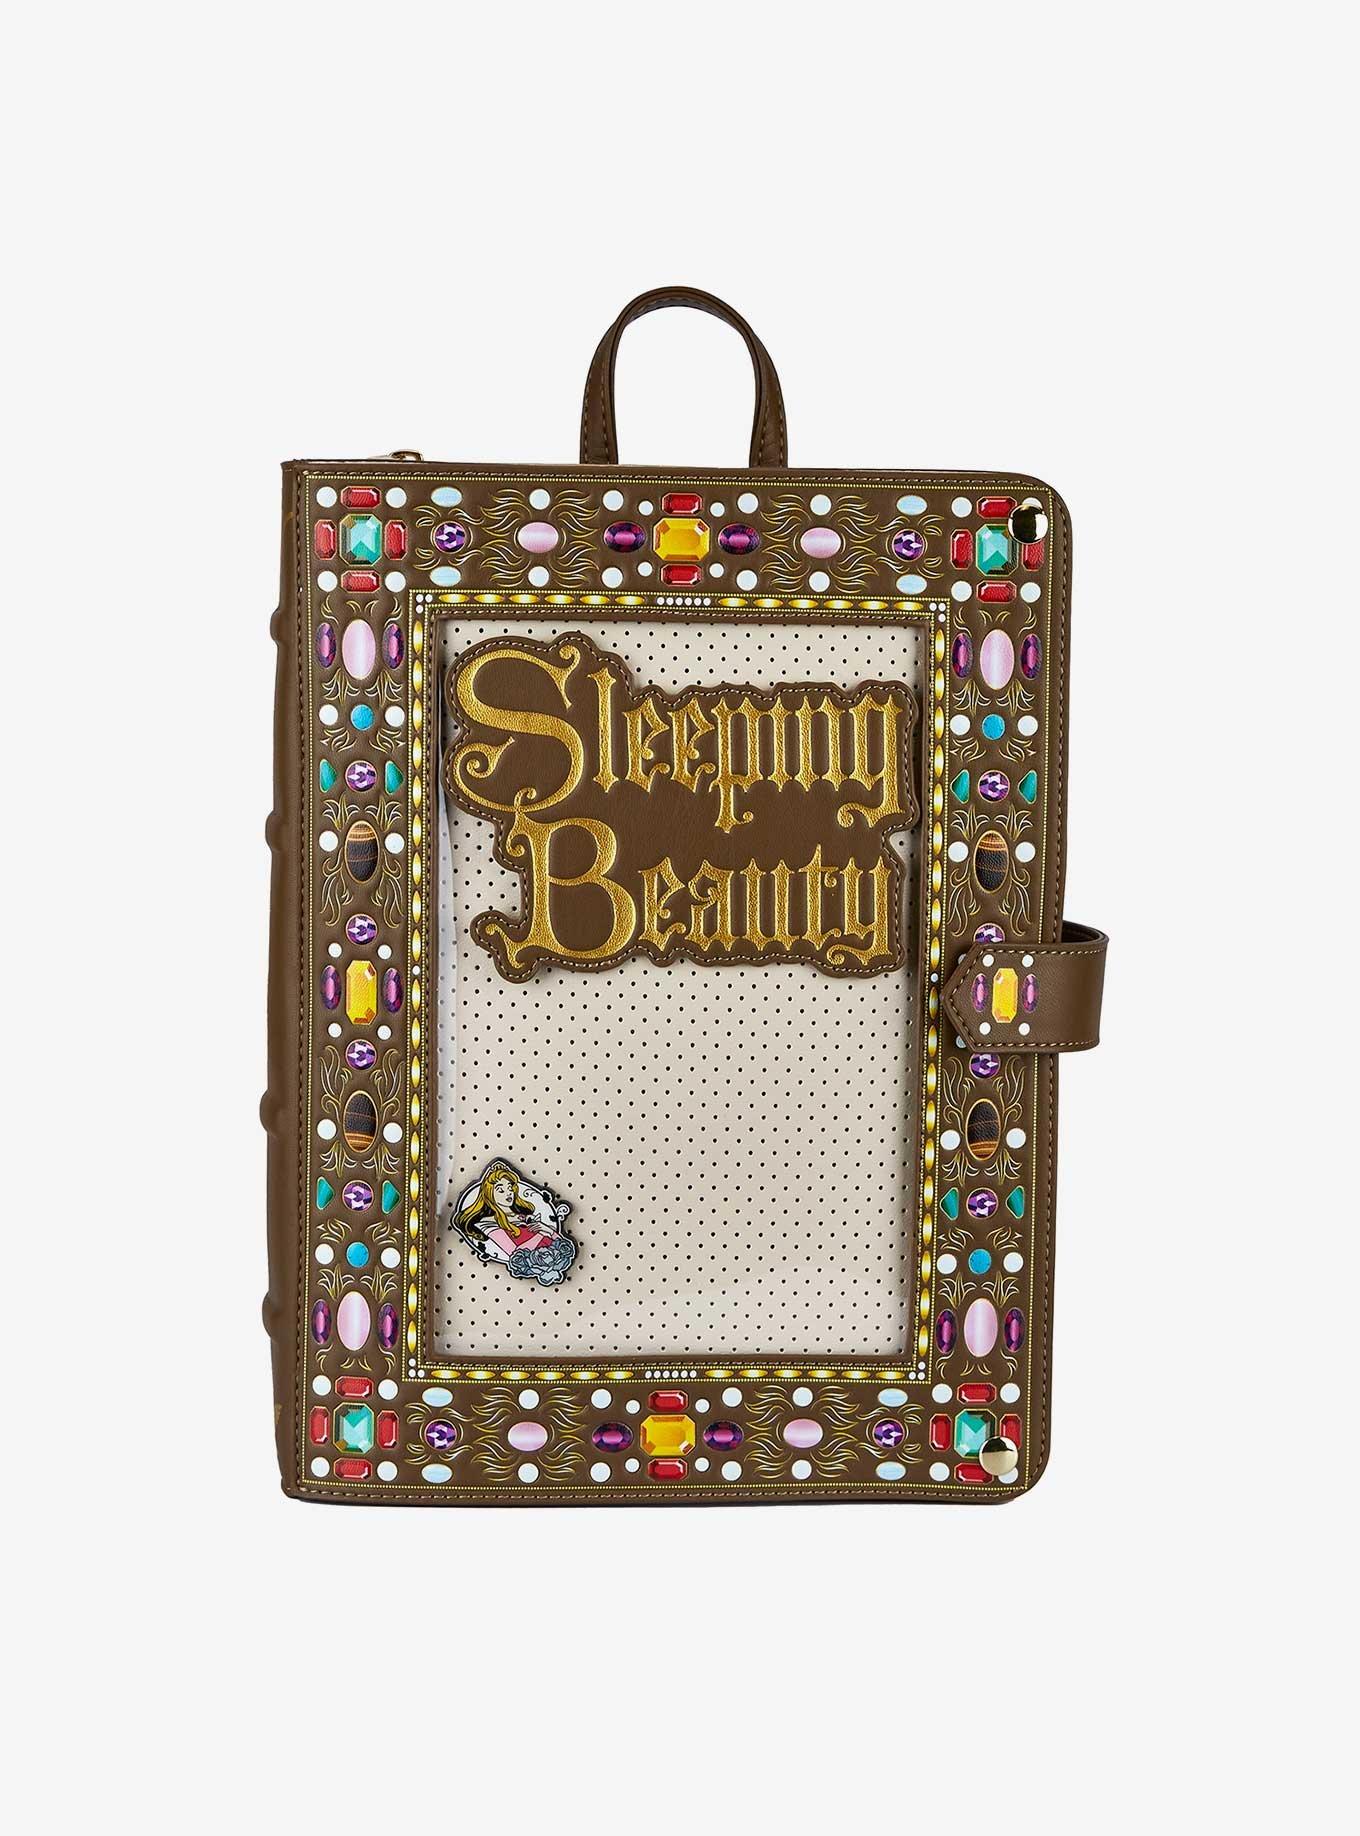 New 'Sleeping Beauty' Loungefly Collection Released 